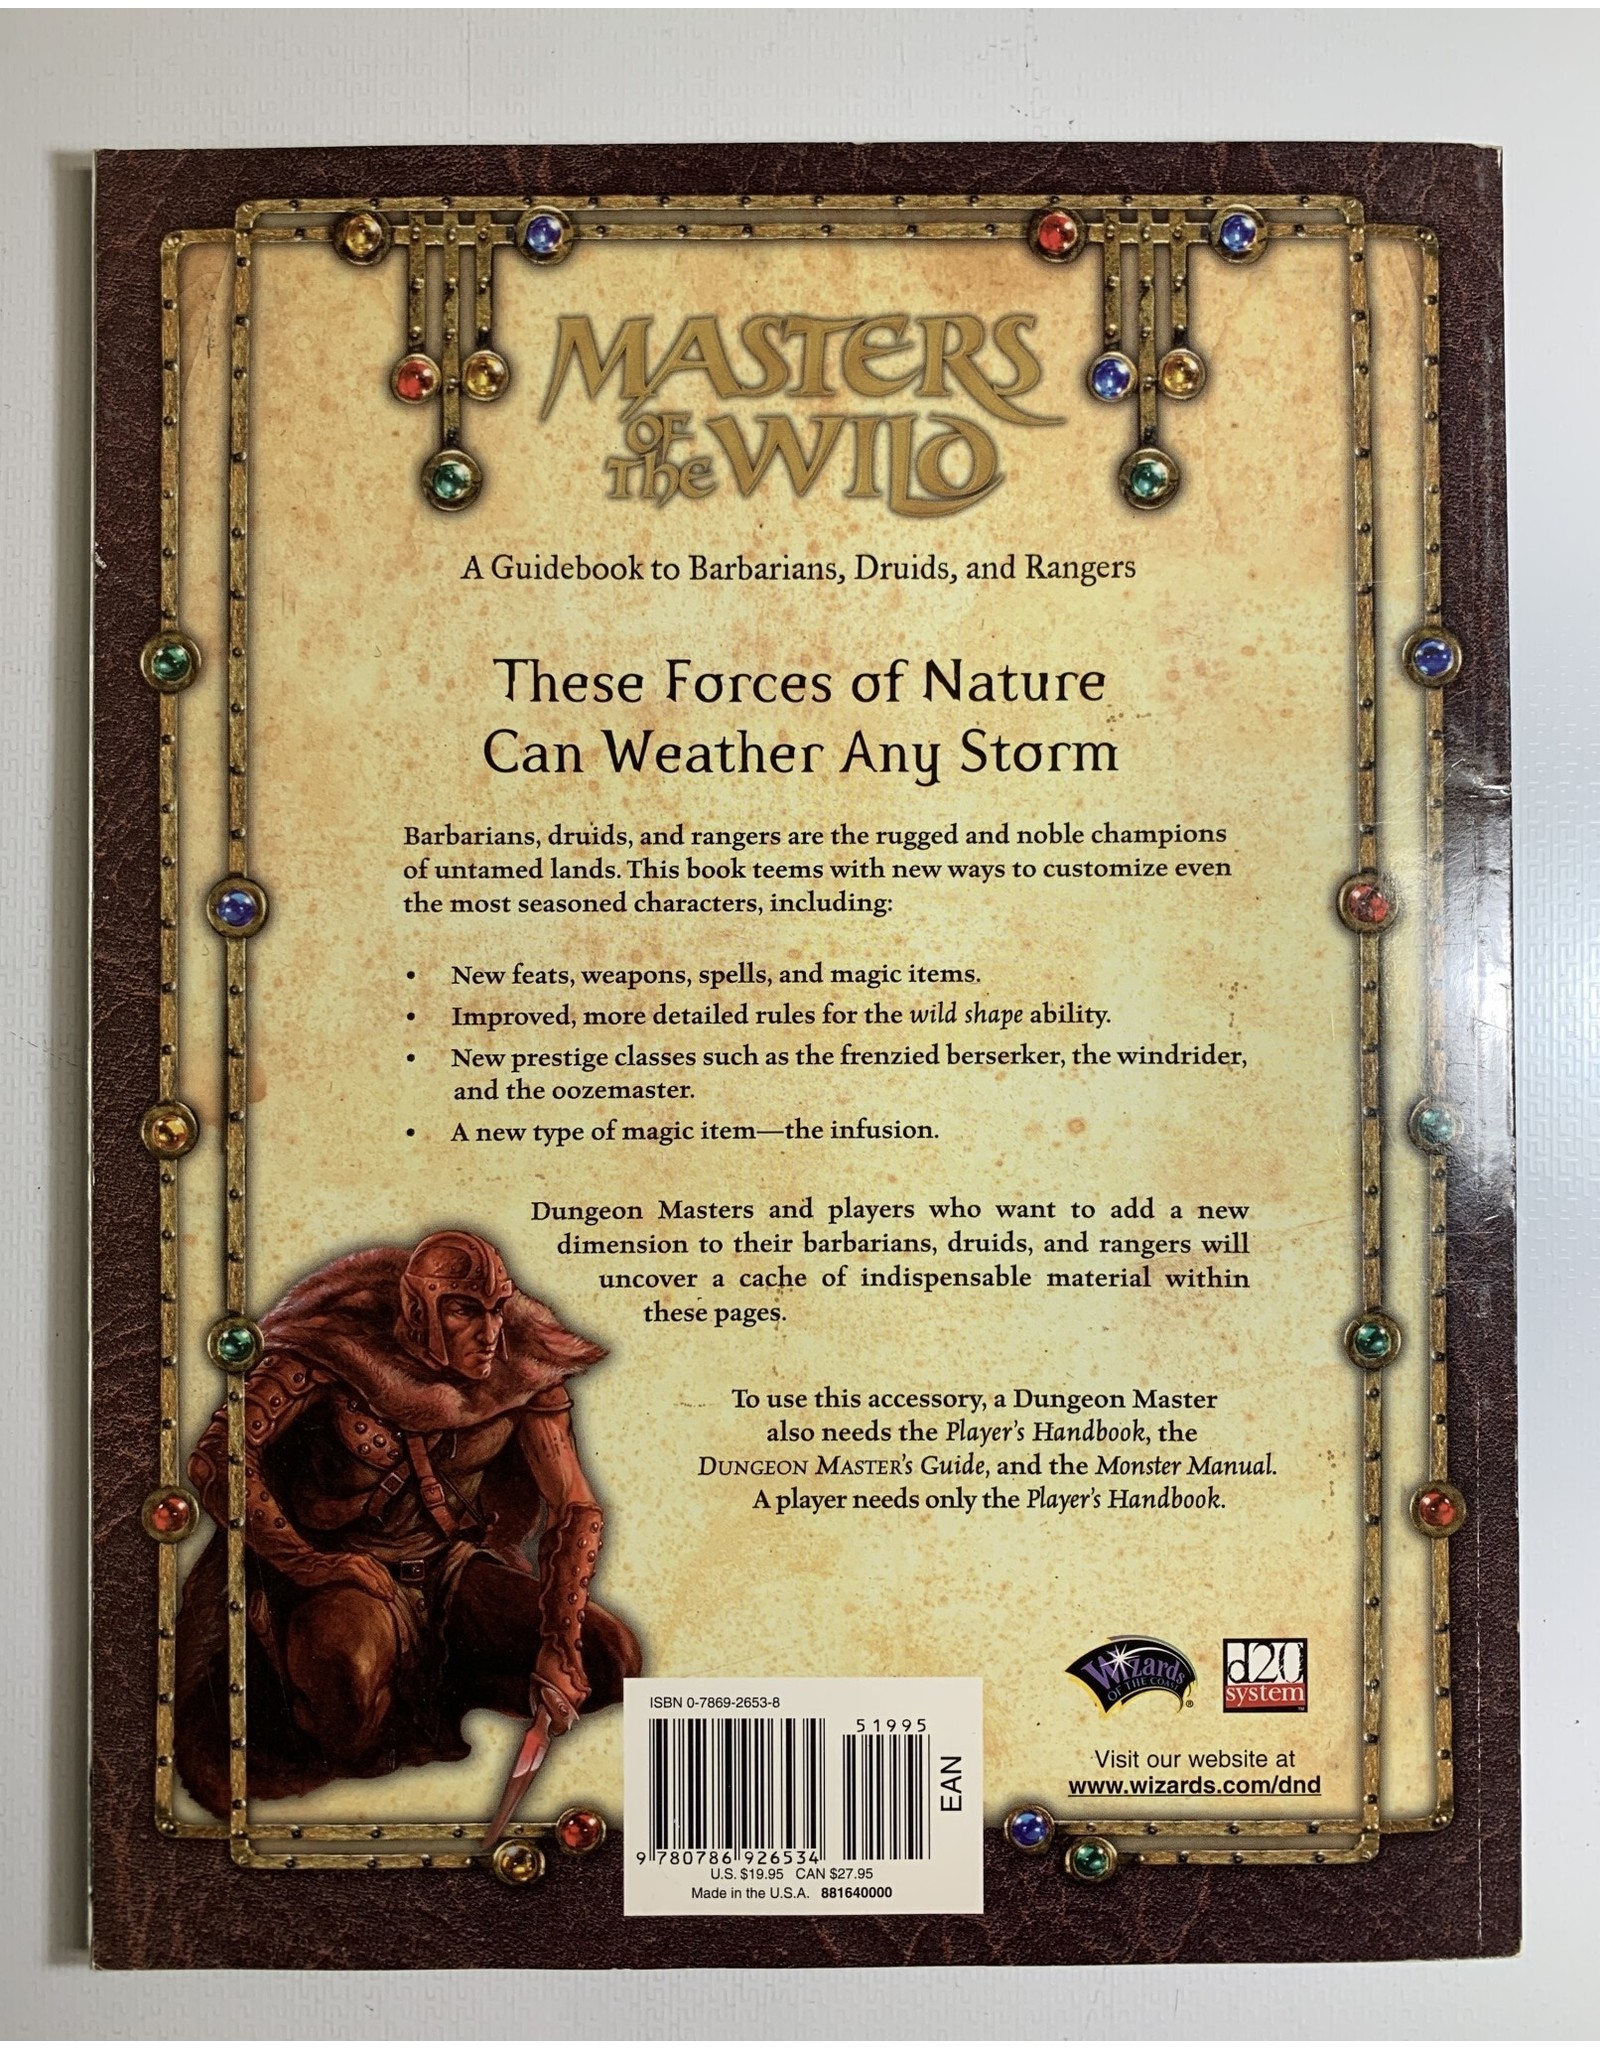 Wizards of the Coast Dungeons & Dragons (3rd Edition) - Masters of the Wild: A Guidebook to Barbarians, Druids, and Rangers (2002)